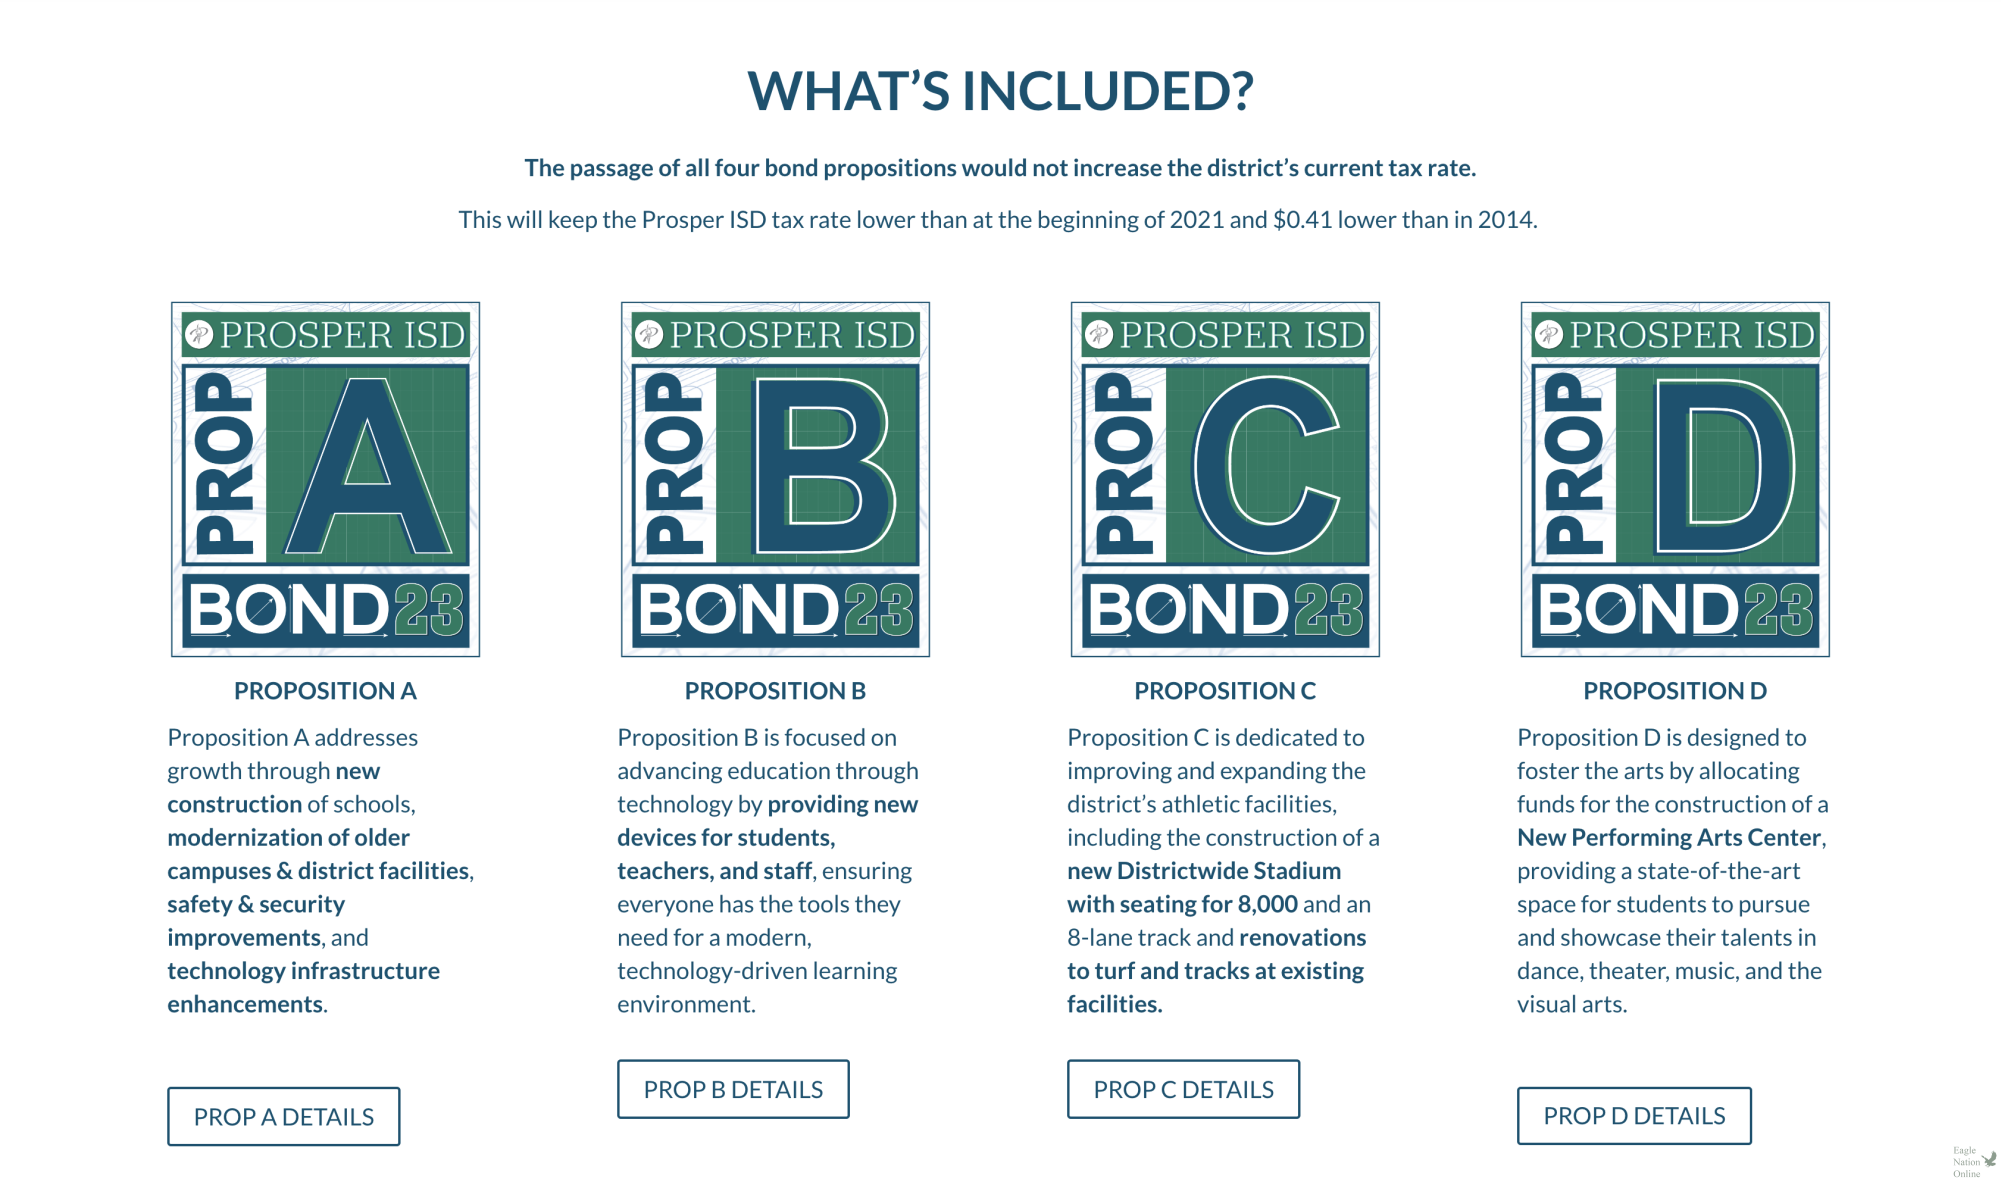 Here are what each proposition for the Prosper ISD bond addresses, as detailed on the Prosper ISD bond website. (Courtesy of the Prosper ISD bond website)